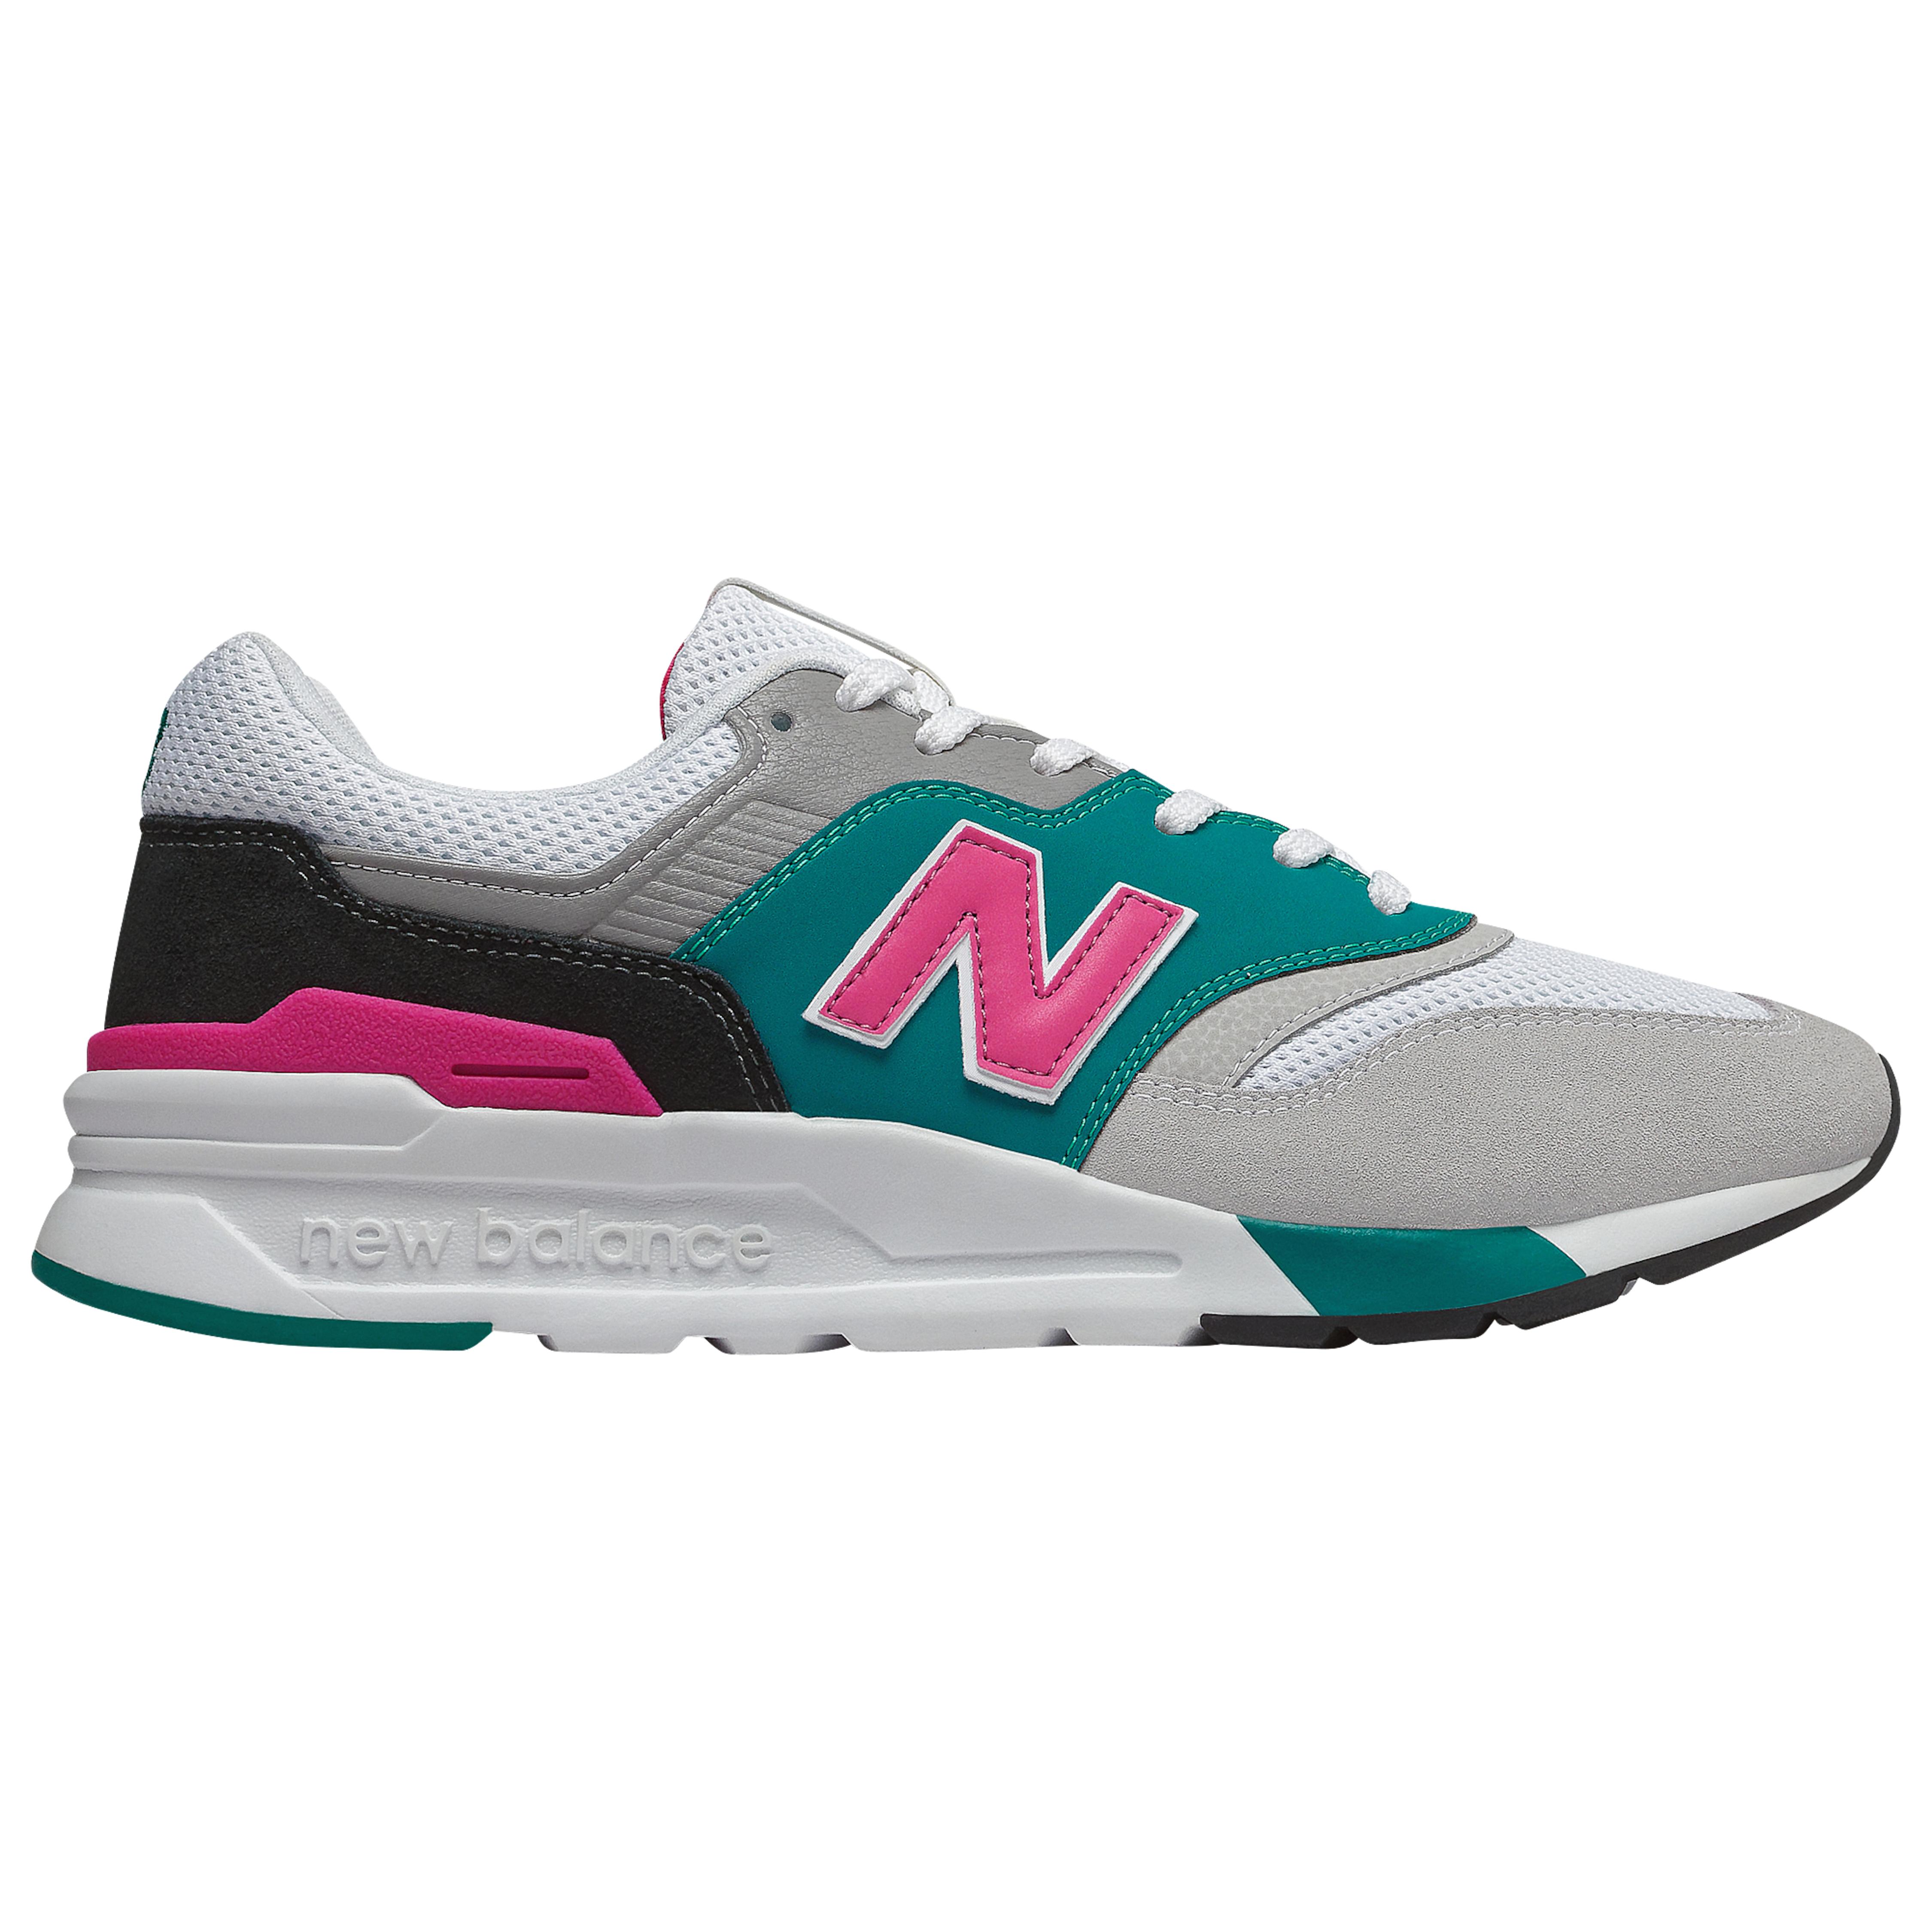 New Balance Rubber 997h Running Shoes in Grey/Teal/Pink (Gray) for Men -  Lyst